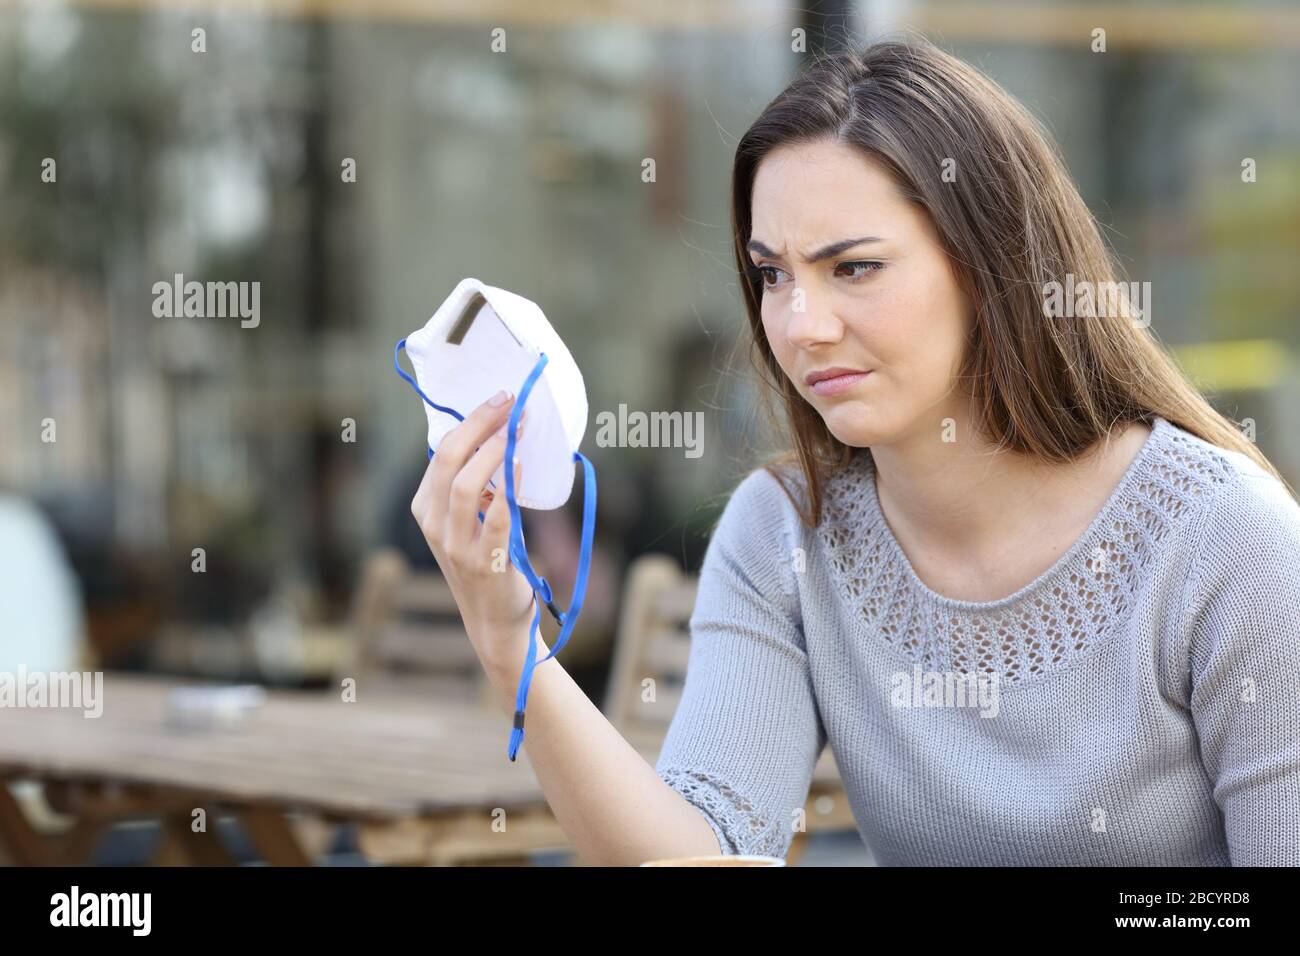 Doubtful woman looking hesitant at protective mask sitting on a coffee shop terrace Stock Photo